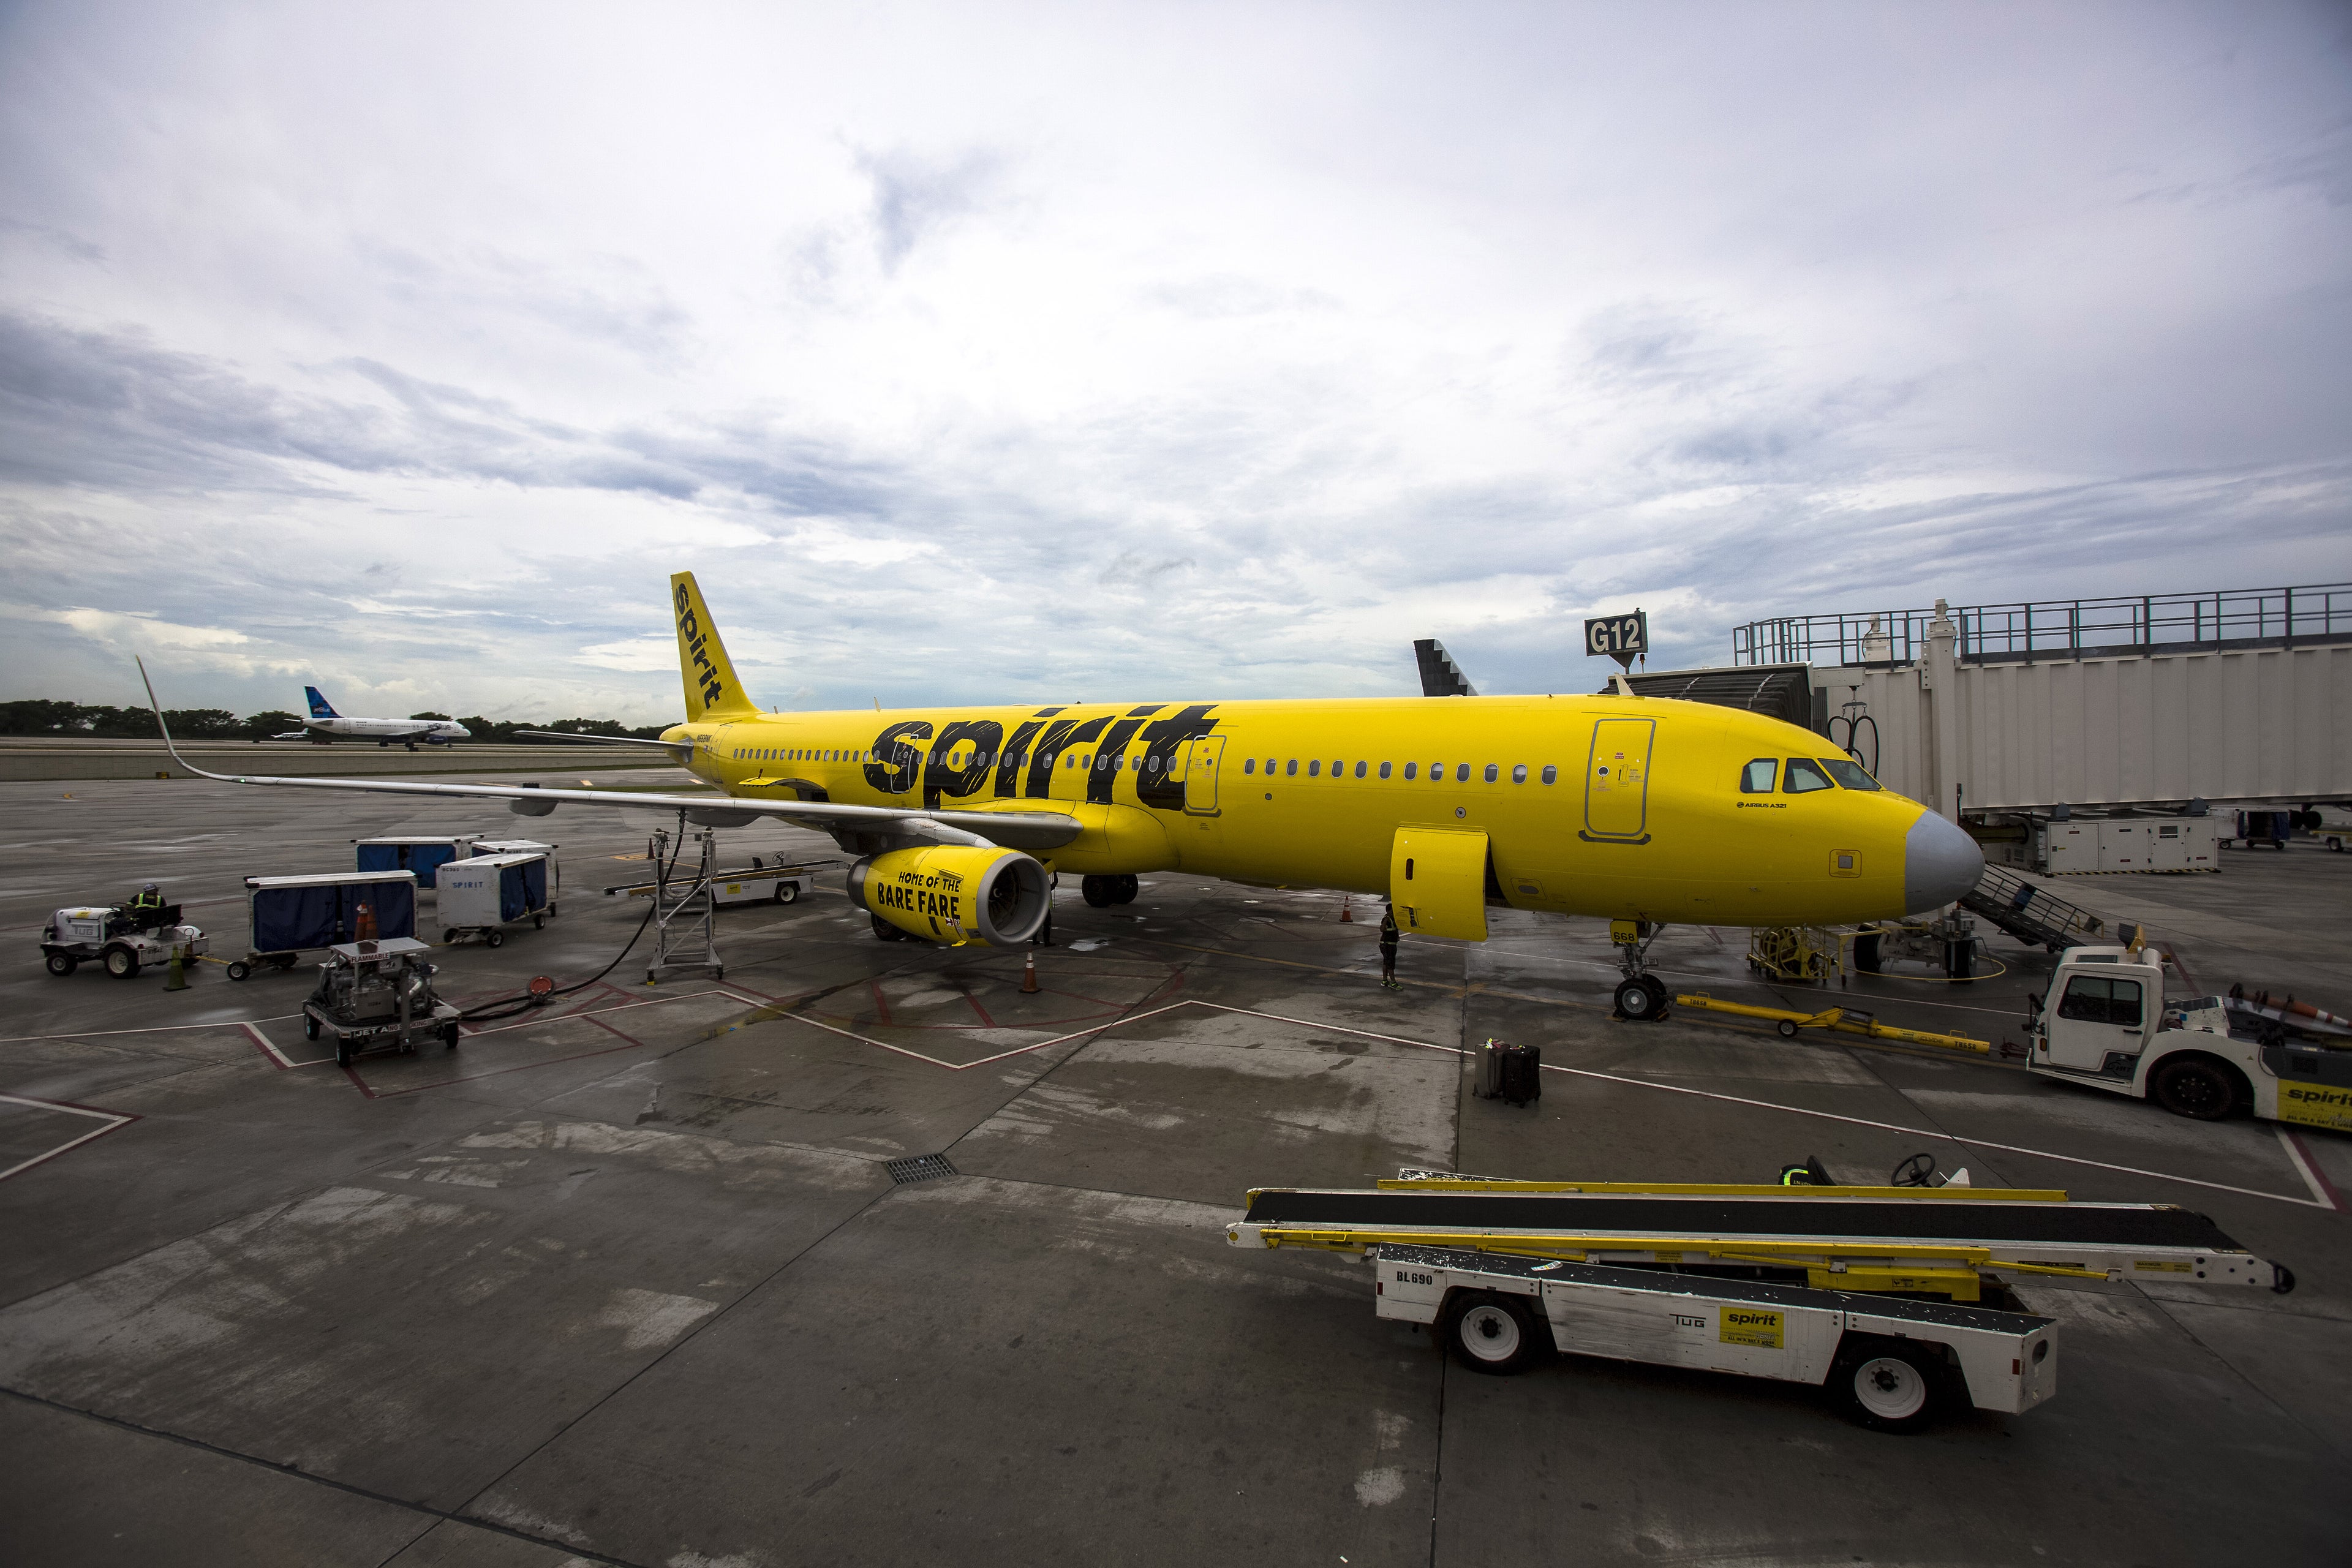 Operations At The Spirit Airlines Inc. Terminal